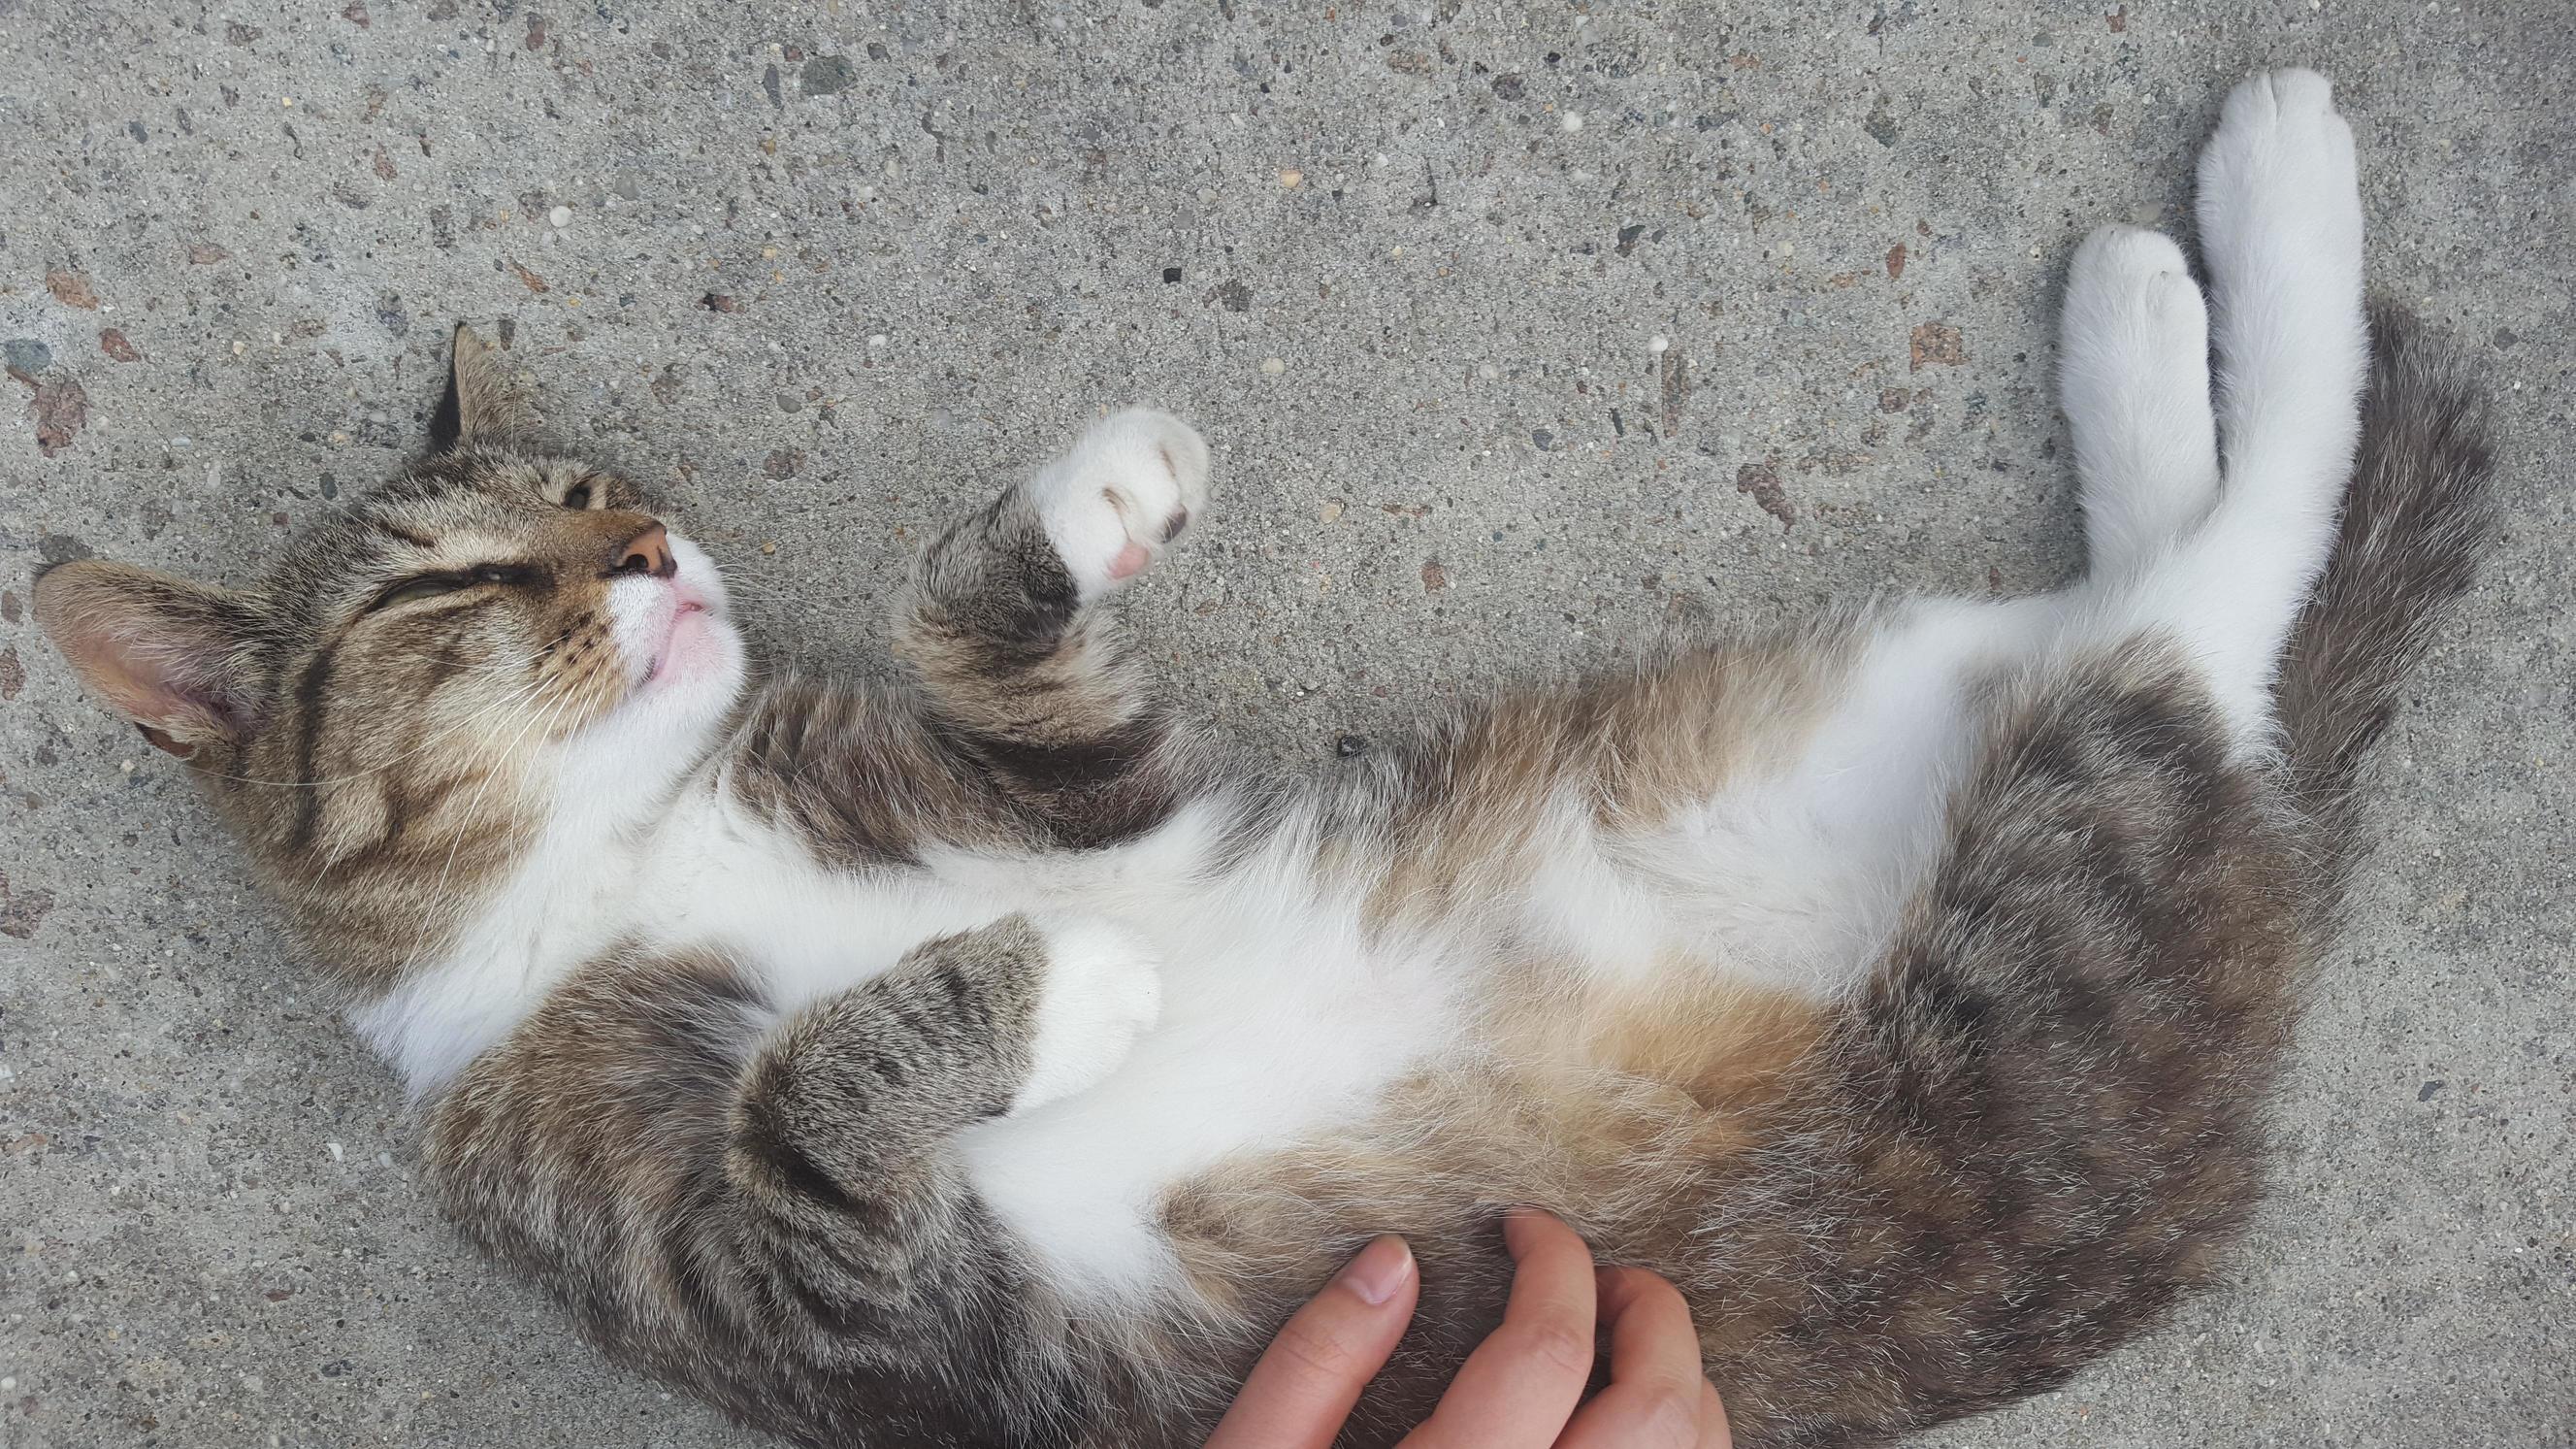 Friend and i met this stray cat who loves belly rubs what a change from all the street cats that run away from me.